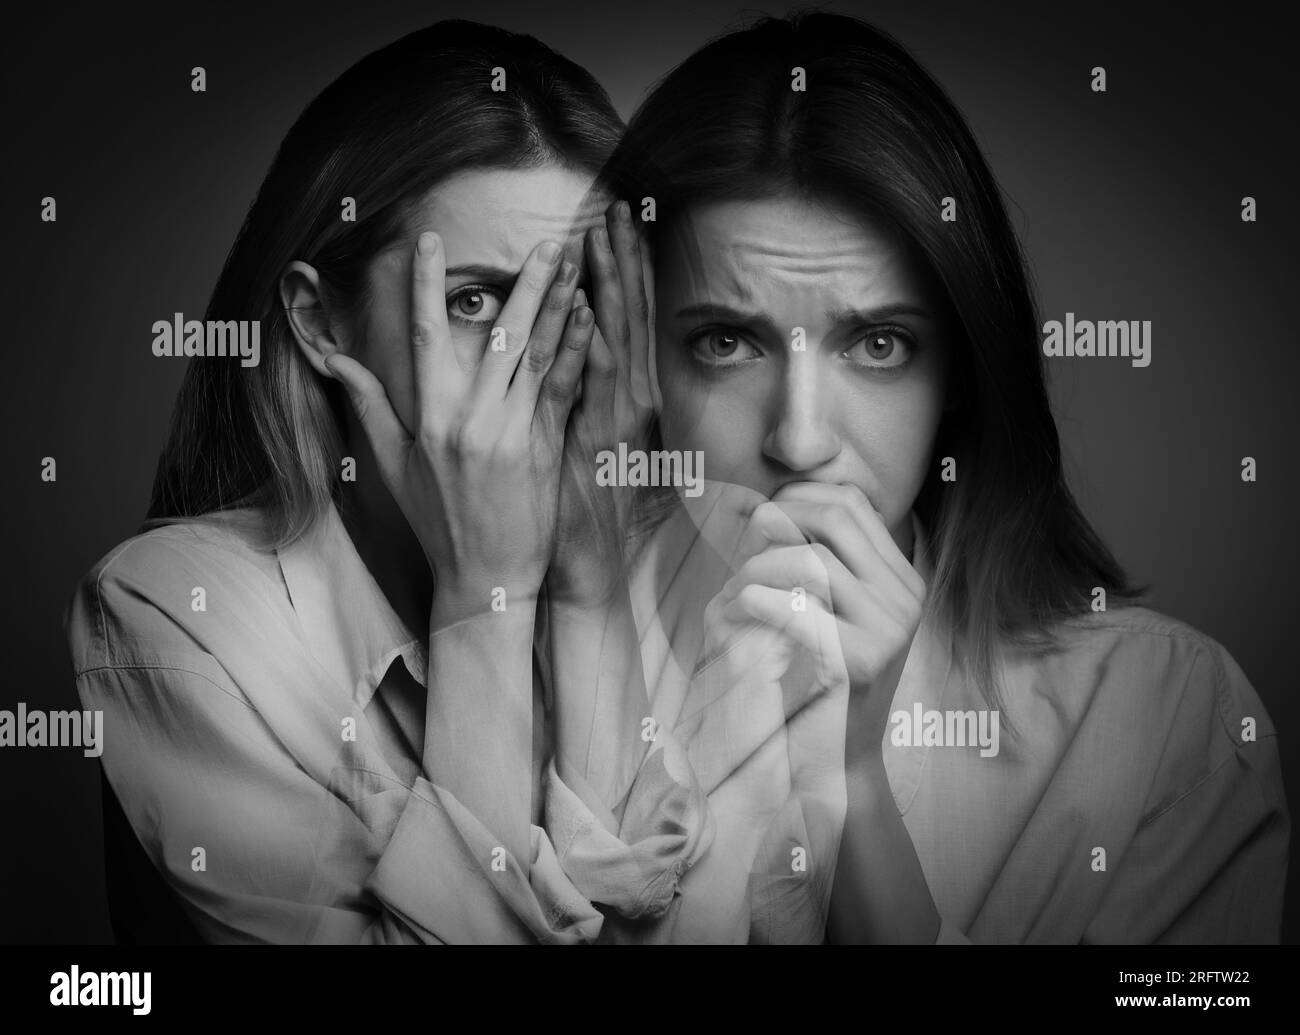 Suffering from hallucinations. Double exposure with photos of woman on dark background, black and white effect Stock Photo